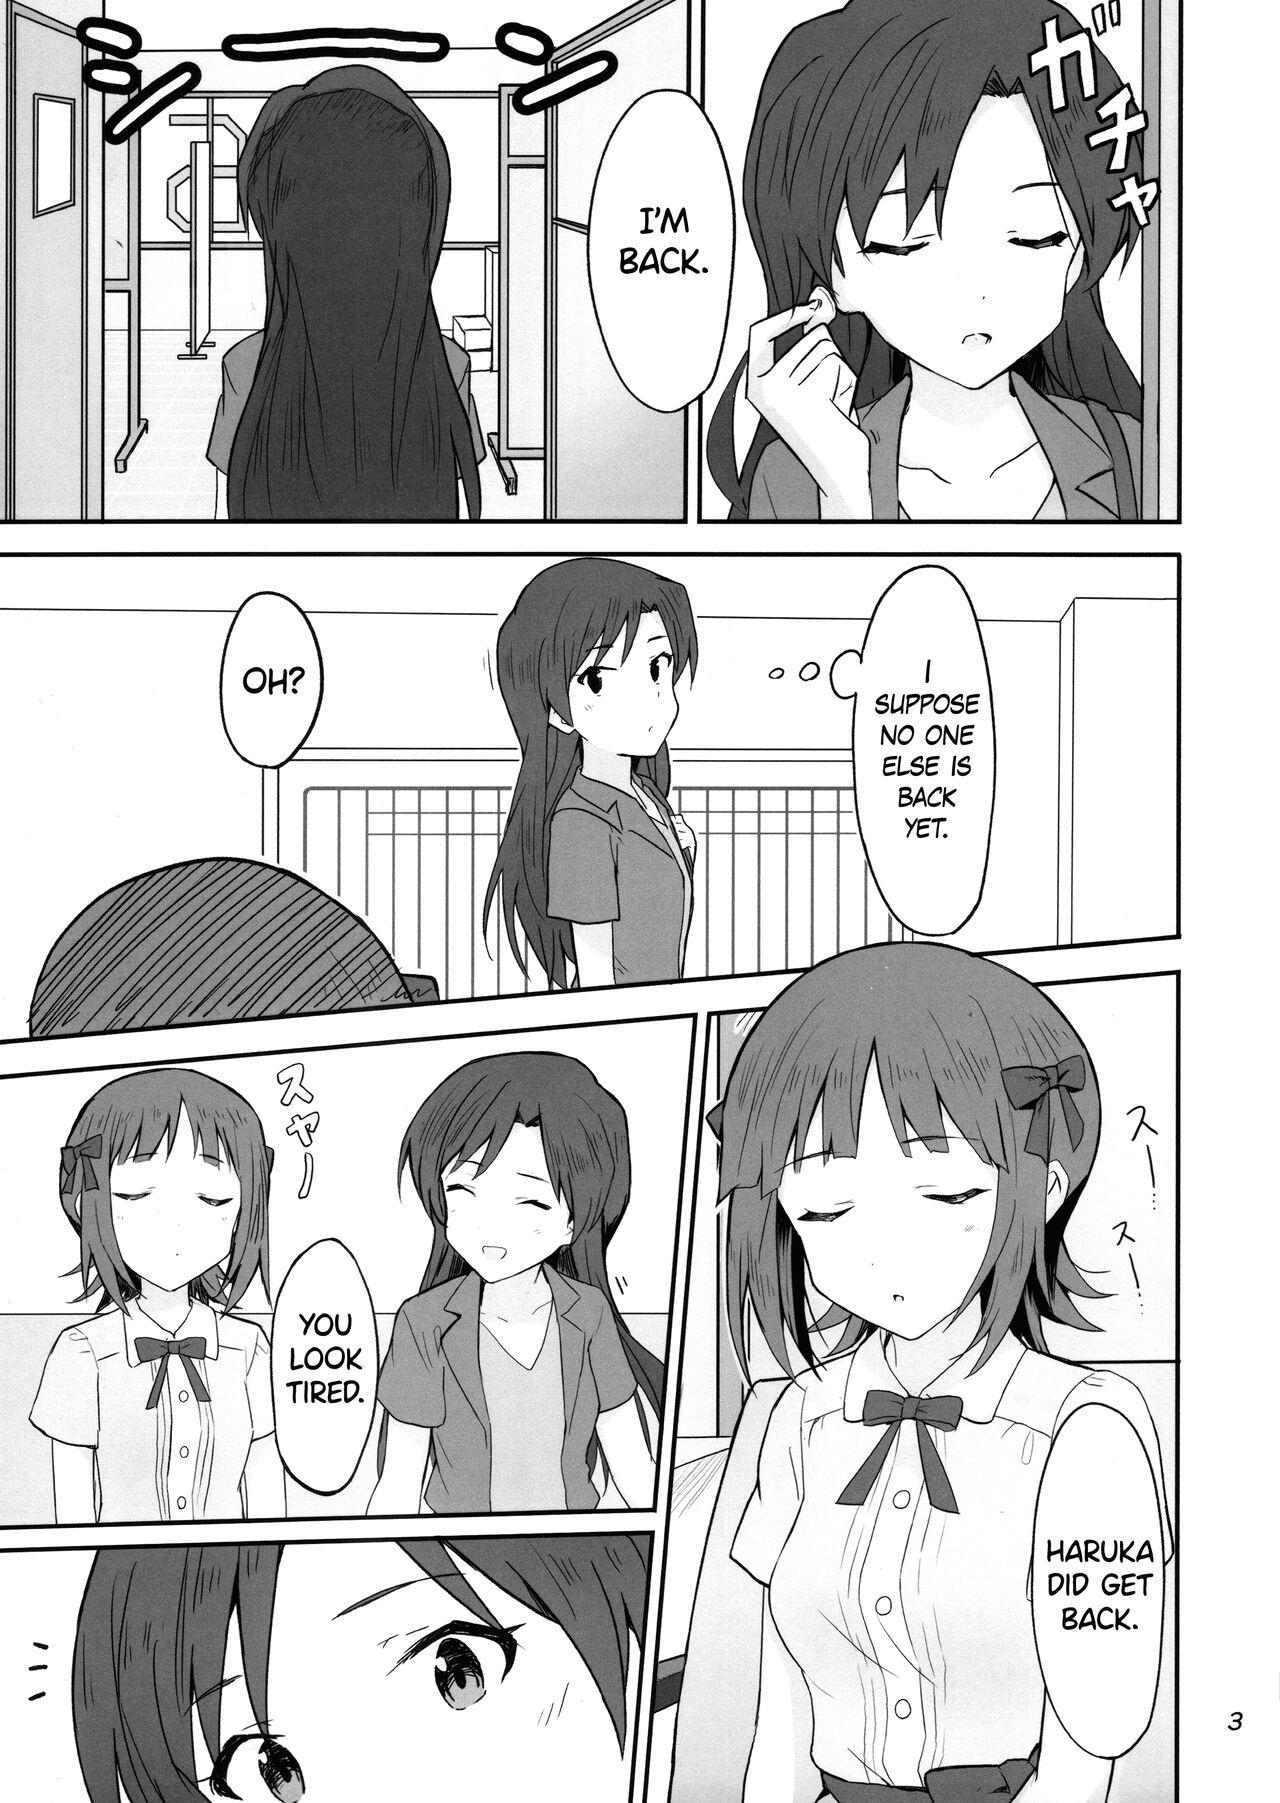 Trio Idle running - The idolmaster Tied - Page 2